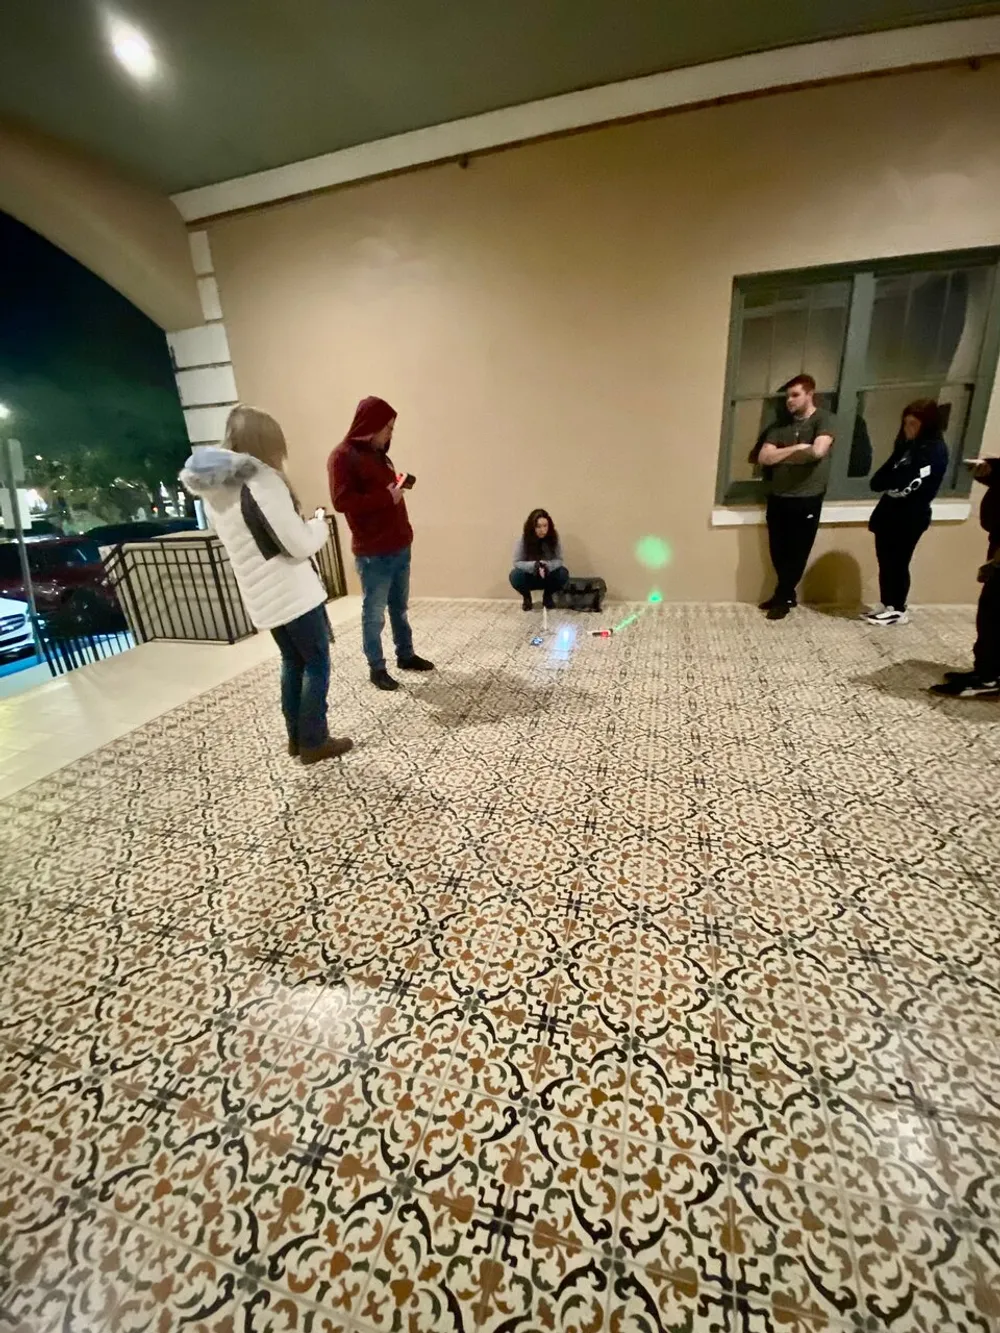 A group of individuals appears to be engaged in casual conversation or waiting for an event in an outdoor covered area with patterned flooring at night